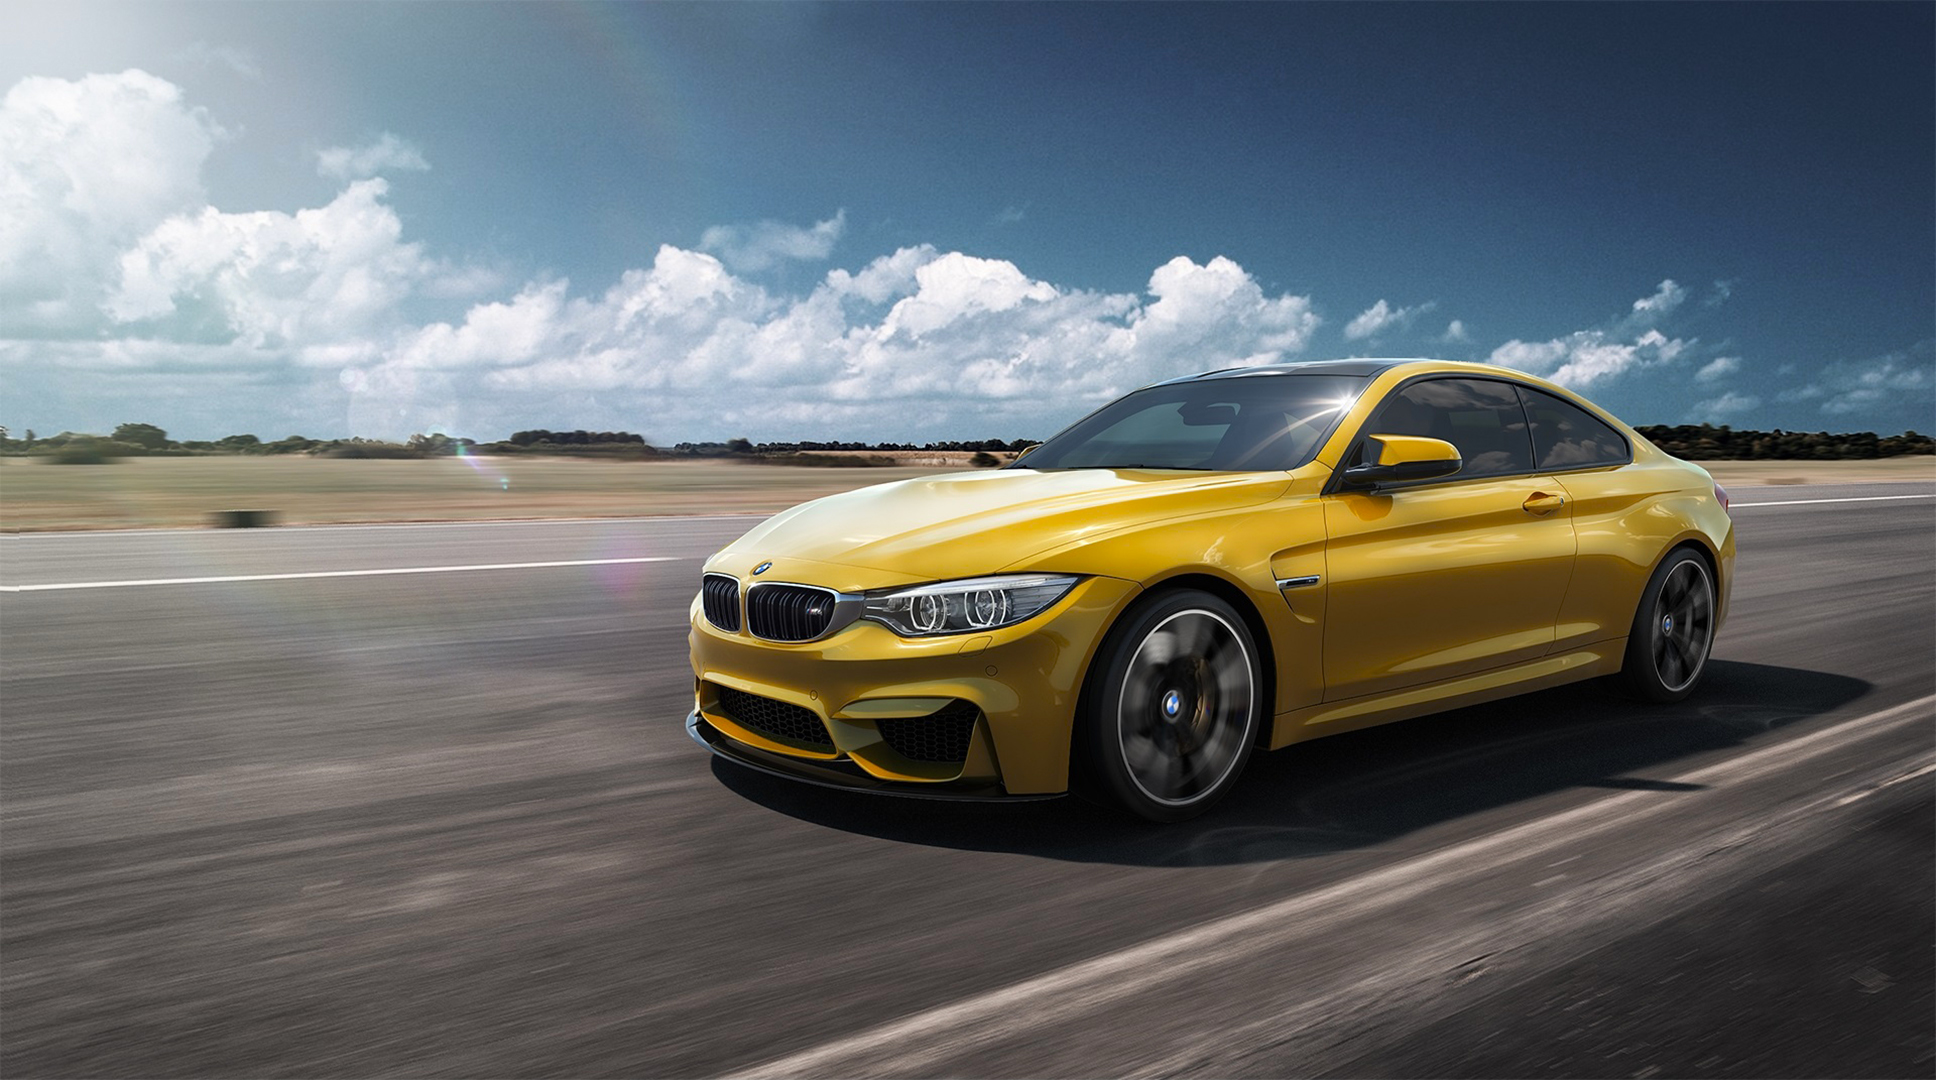 grand tourer, bmw, yellow car, vehicles Bmw M4 HQ Background Images